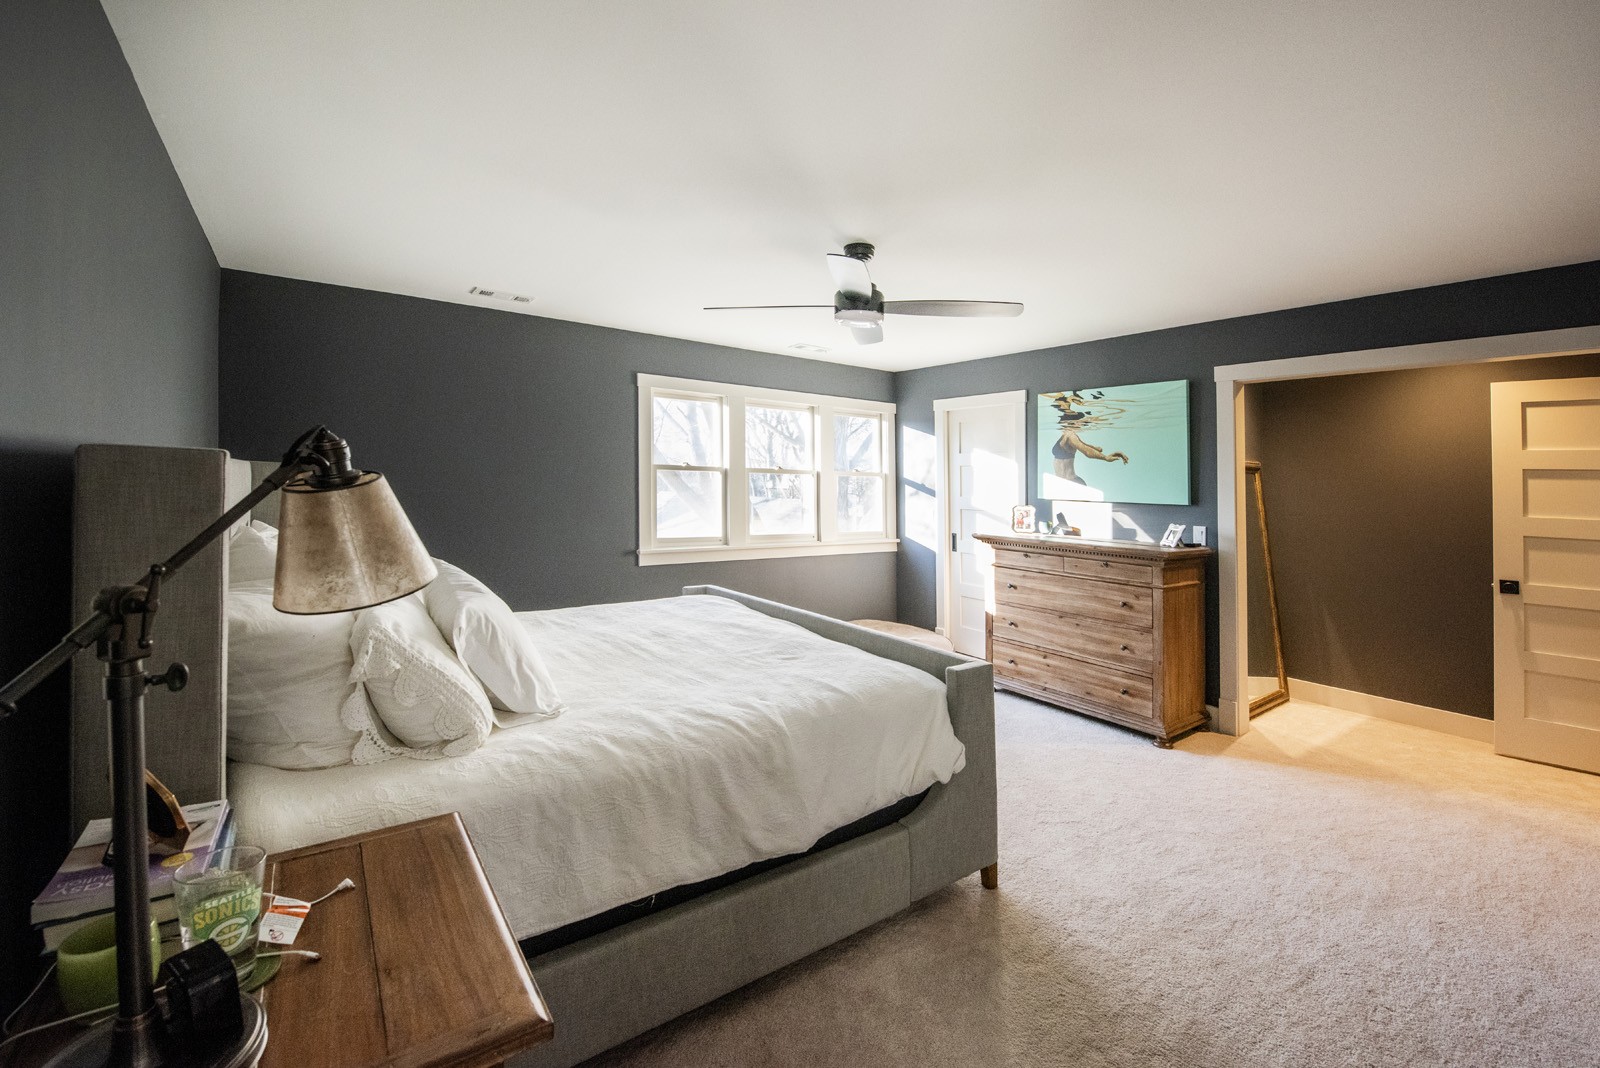 Bedroom with grey walls carpet a grey bed with white bedding and wooden nightstand and dresser